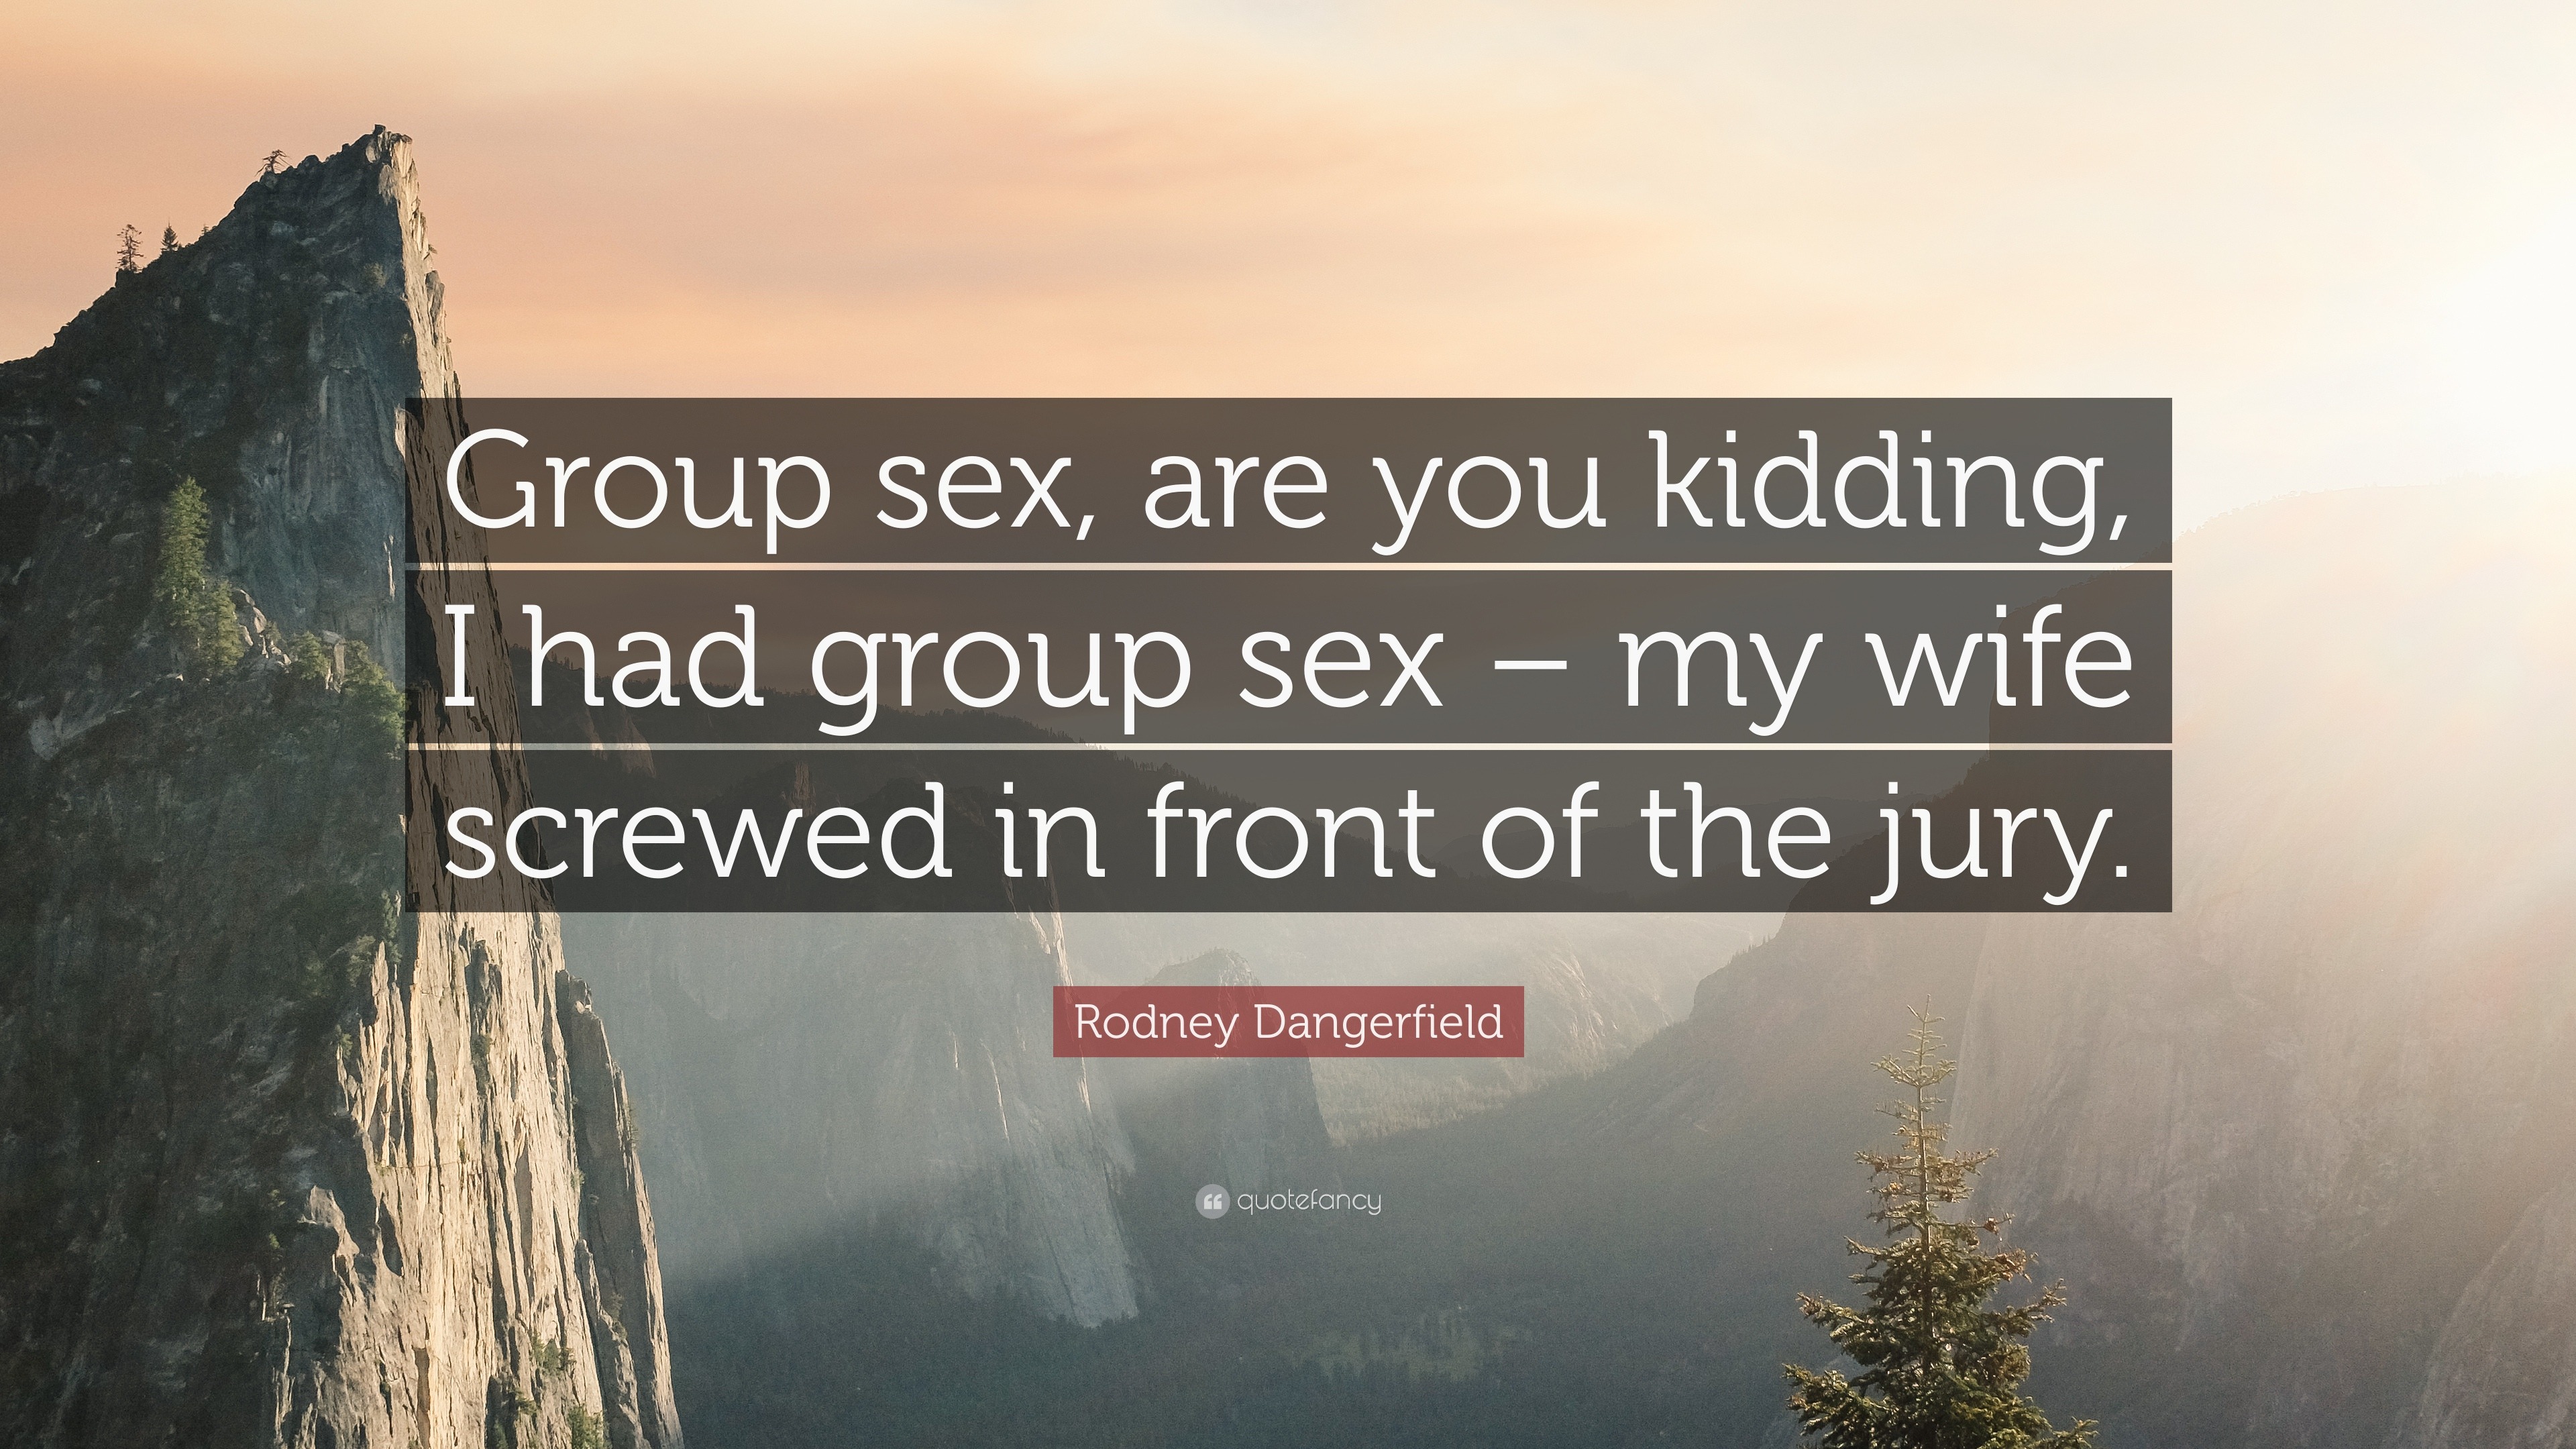 Rodney Dangerfield Quote “Group sex, are you kidding, I had group photo